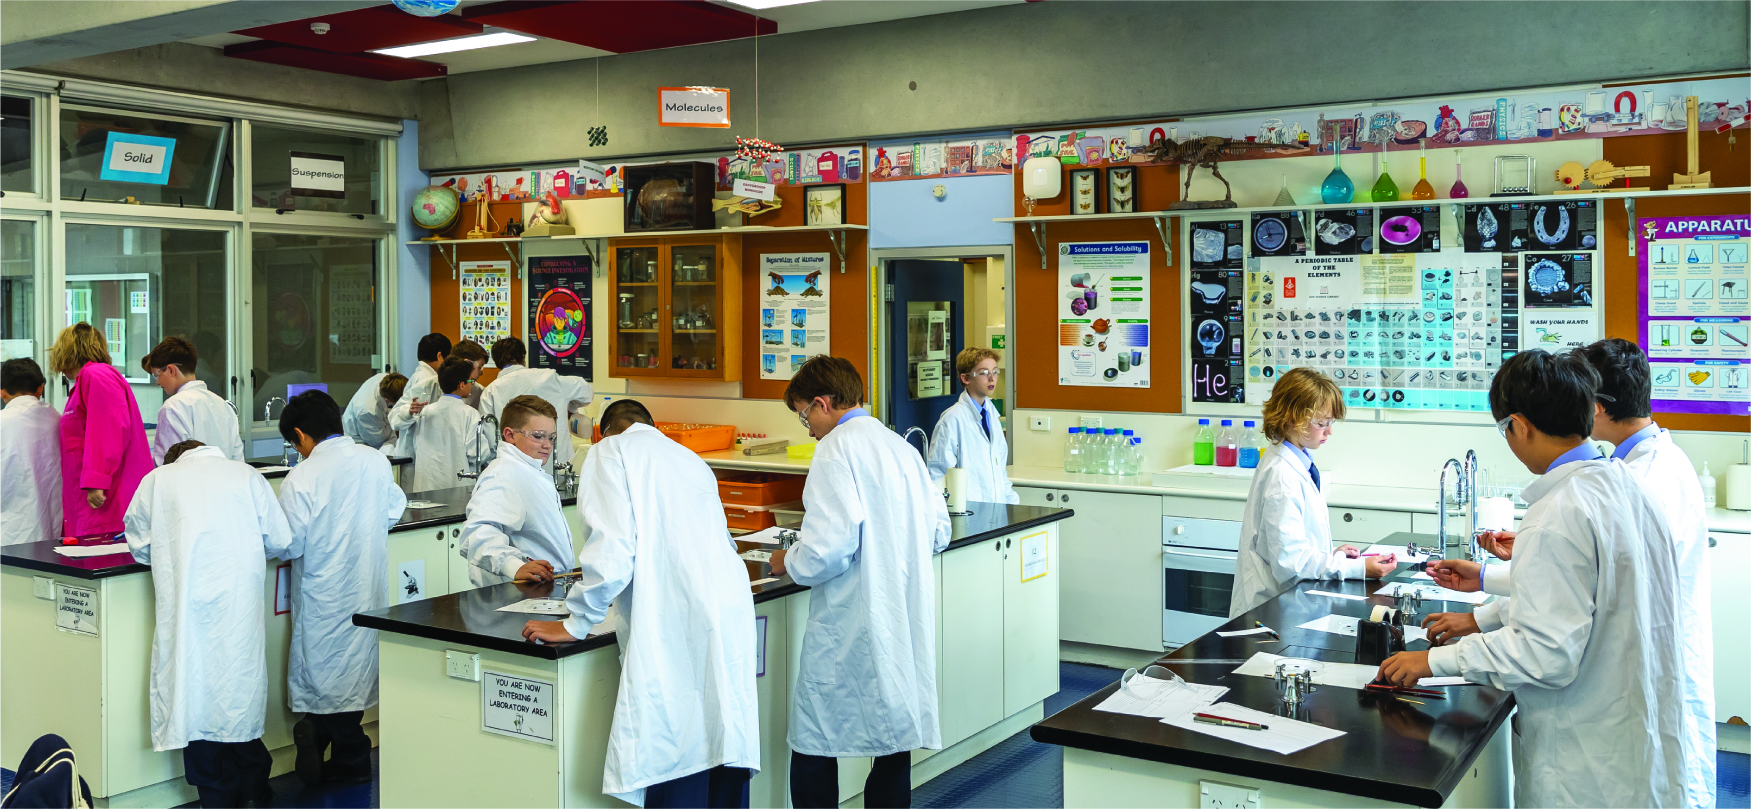 Wadhurst Science and Technology Facilities1